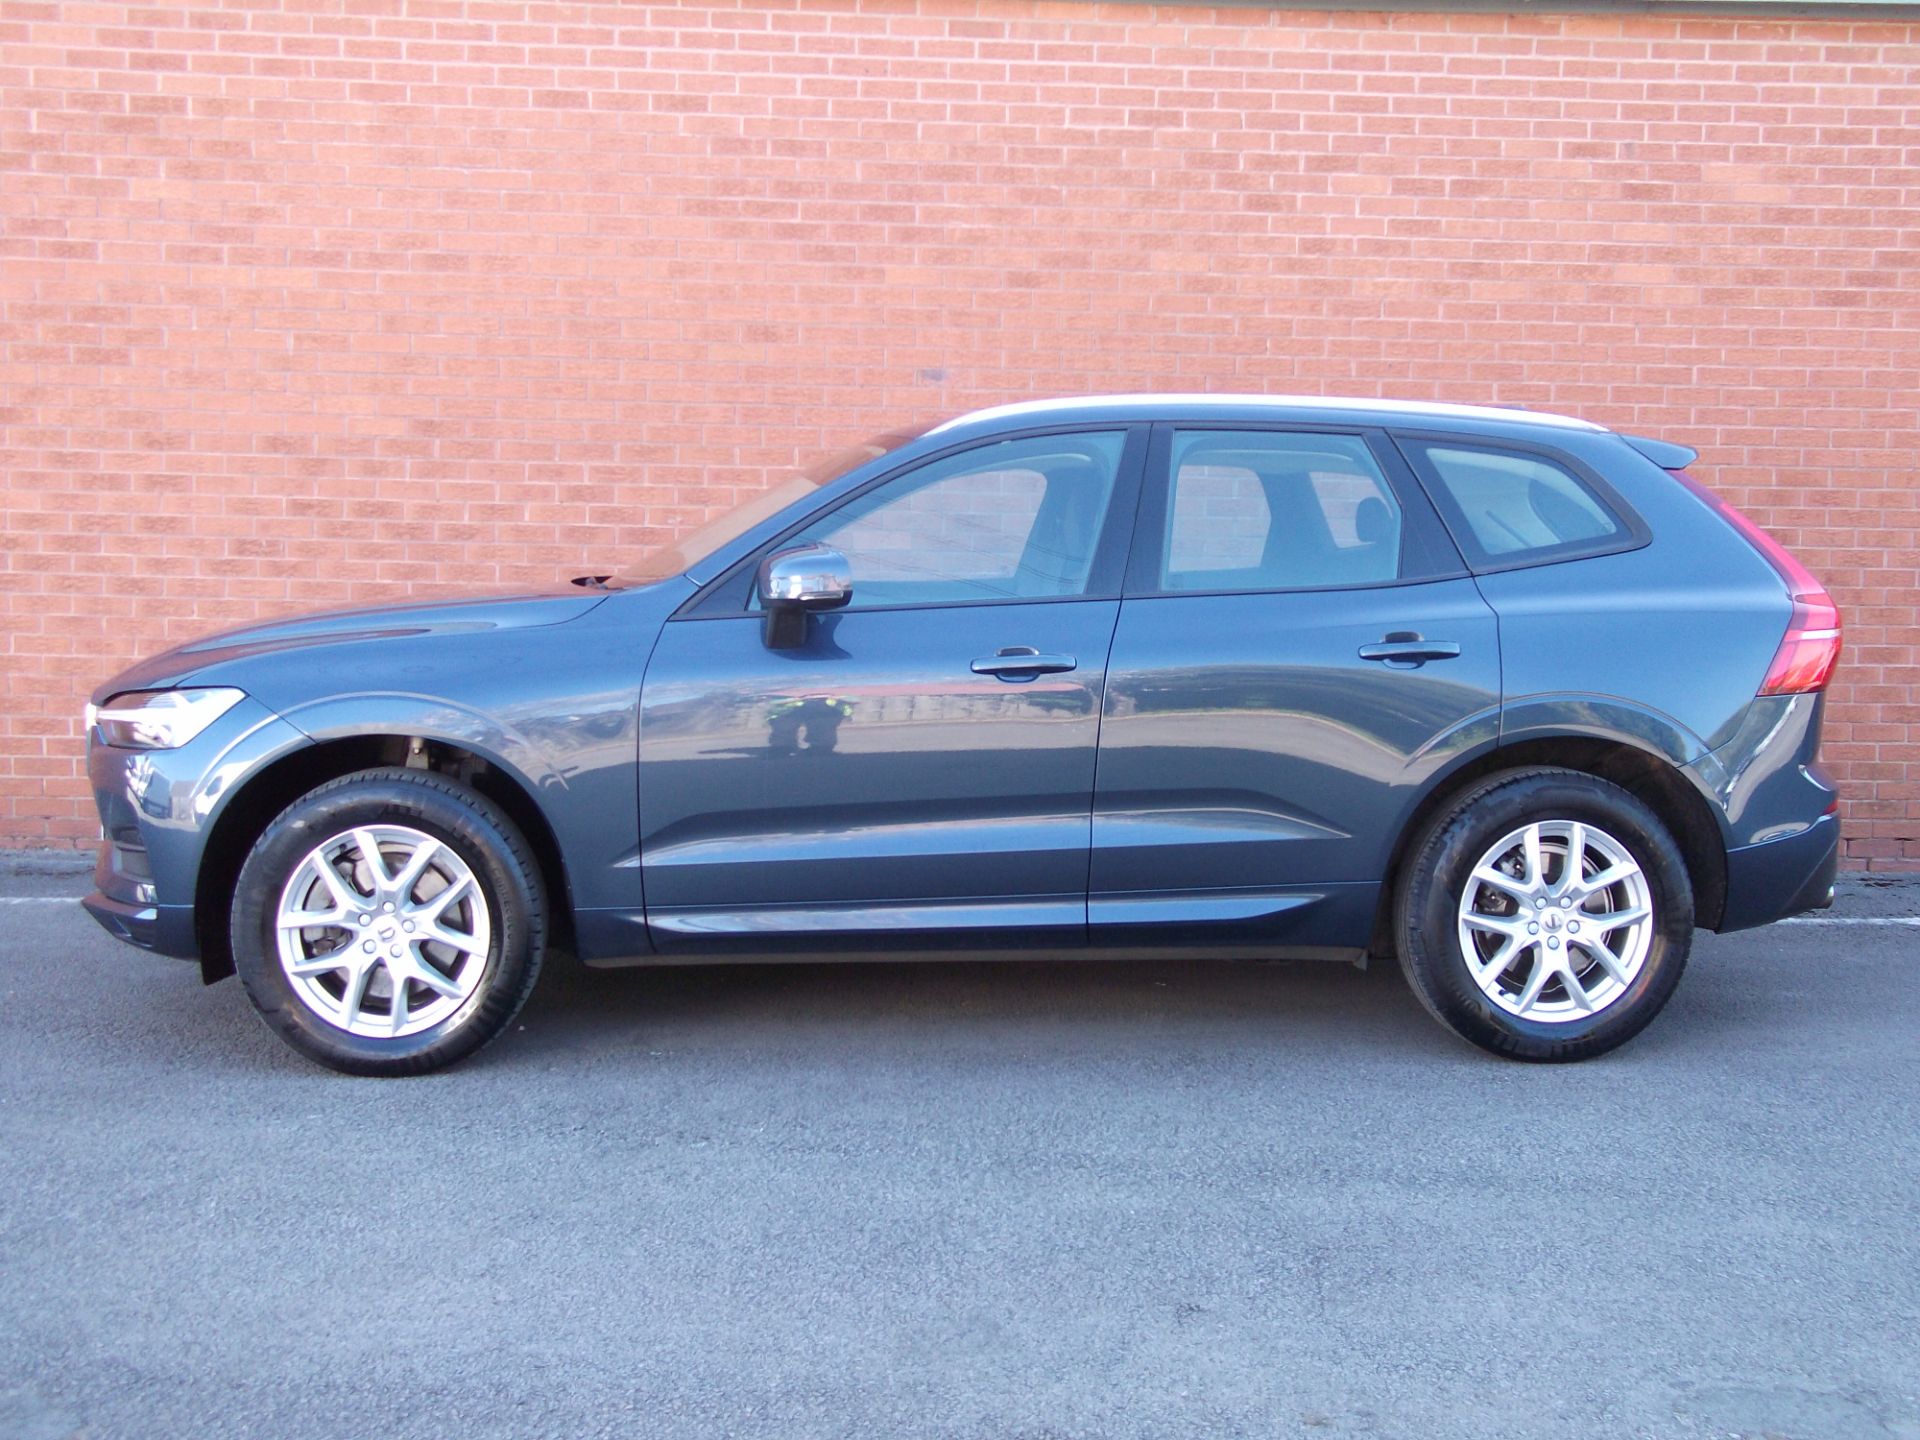 2021 Volvo Xc60 2.0 B5p [250] Momentum 5Dr AWD Geartronic (RX21OVM) Image 6